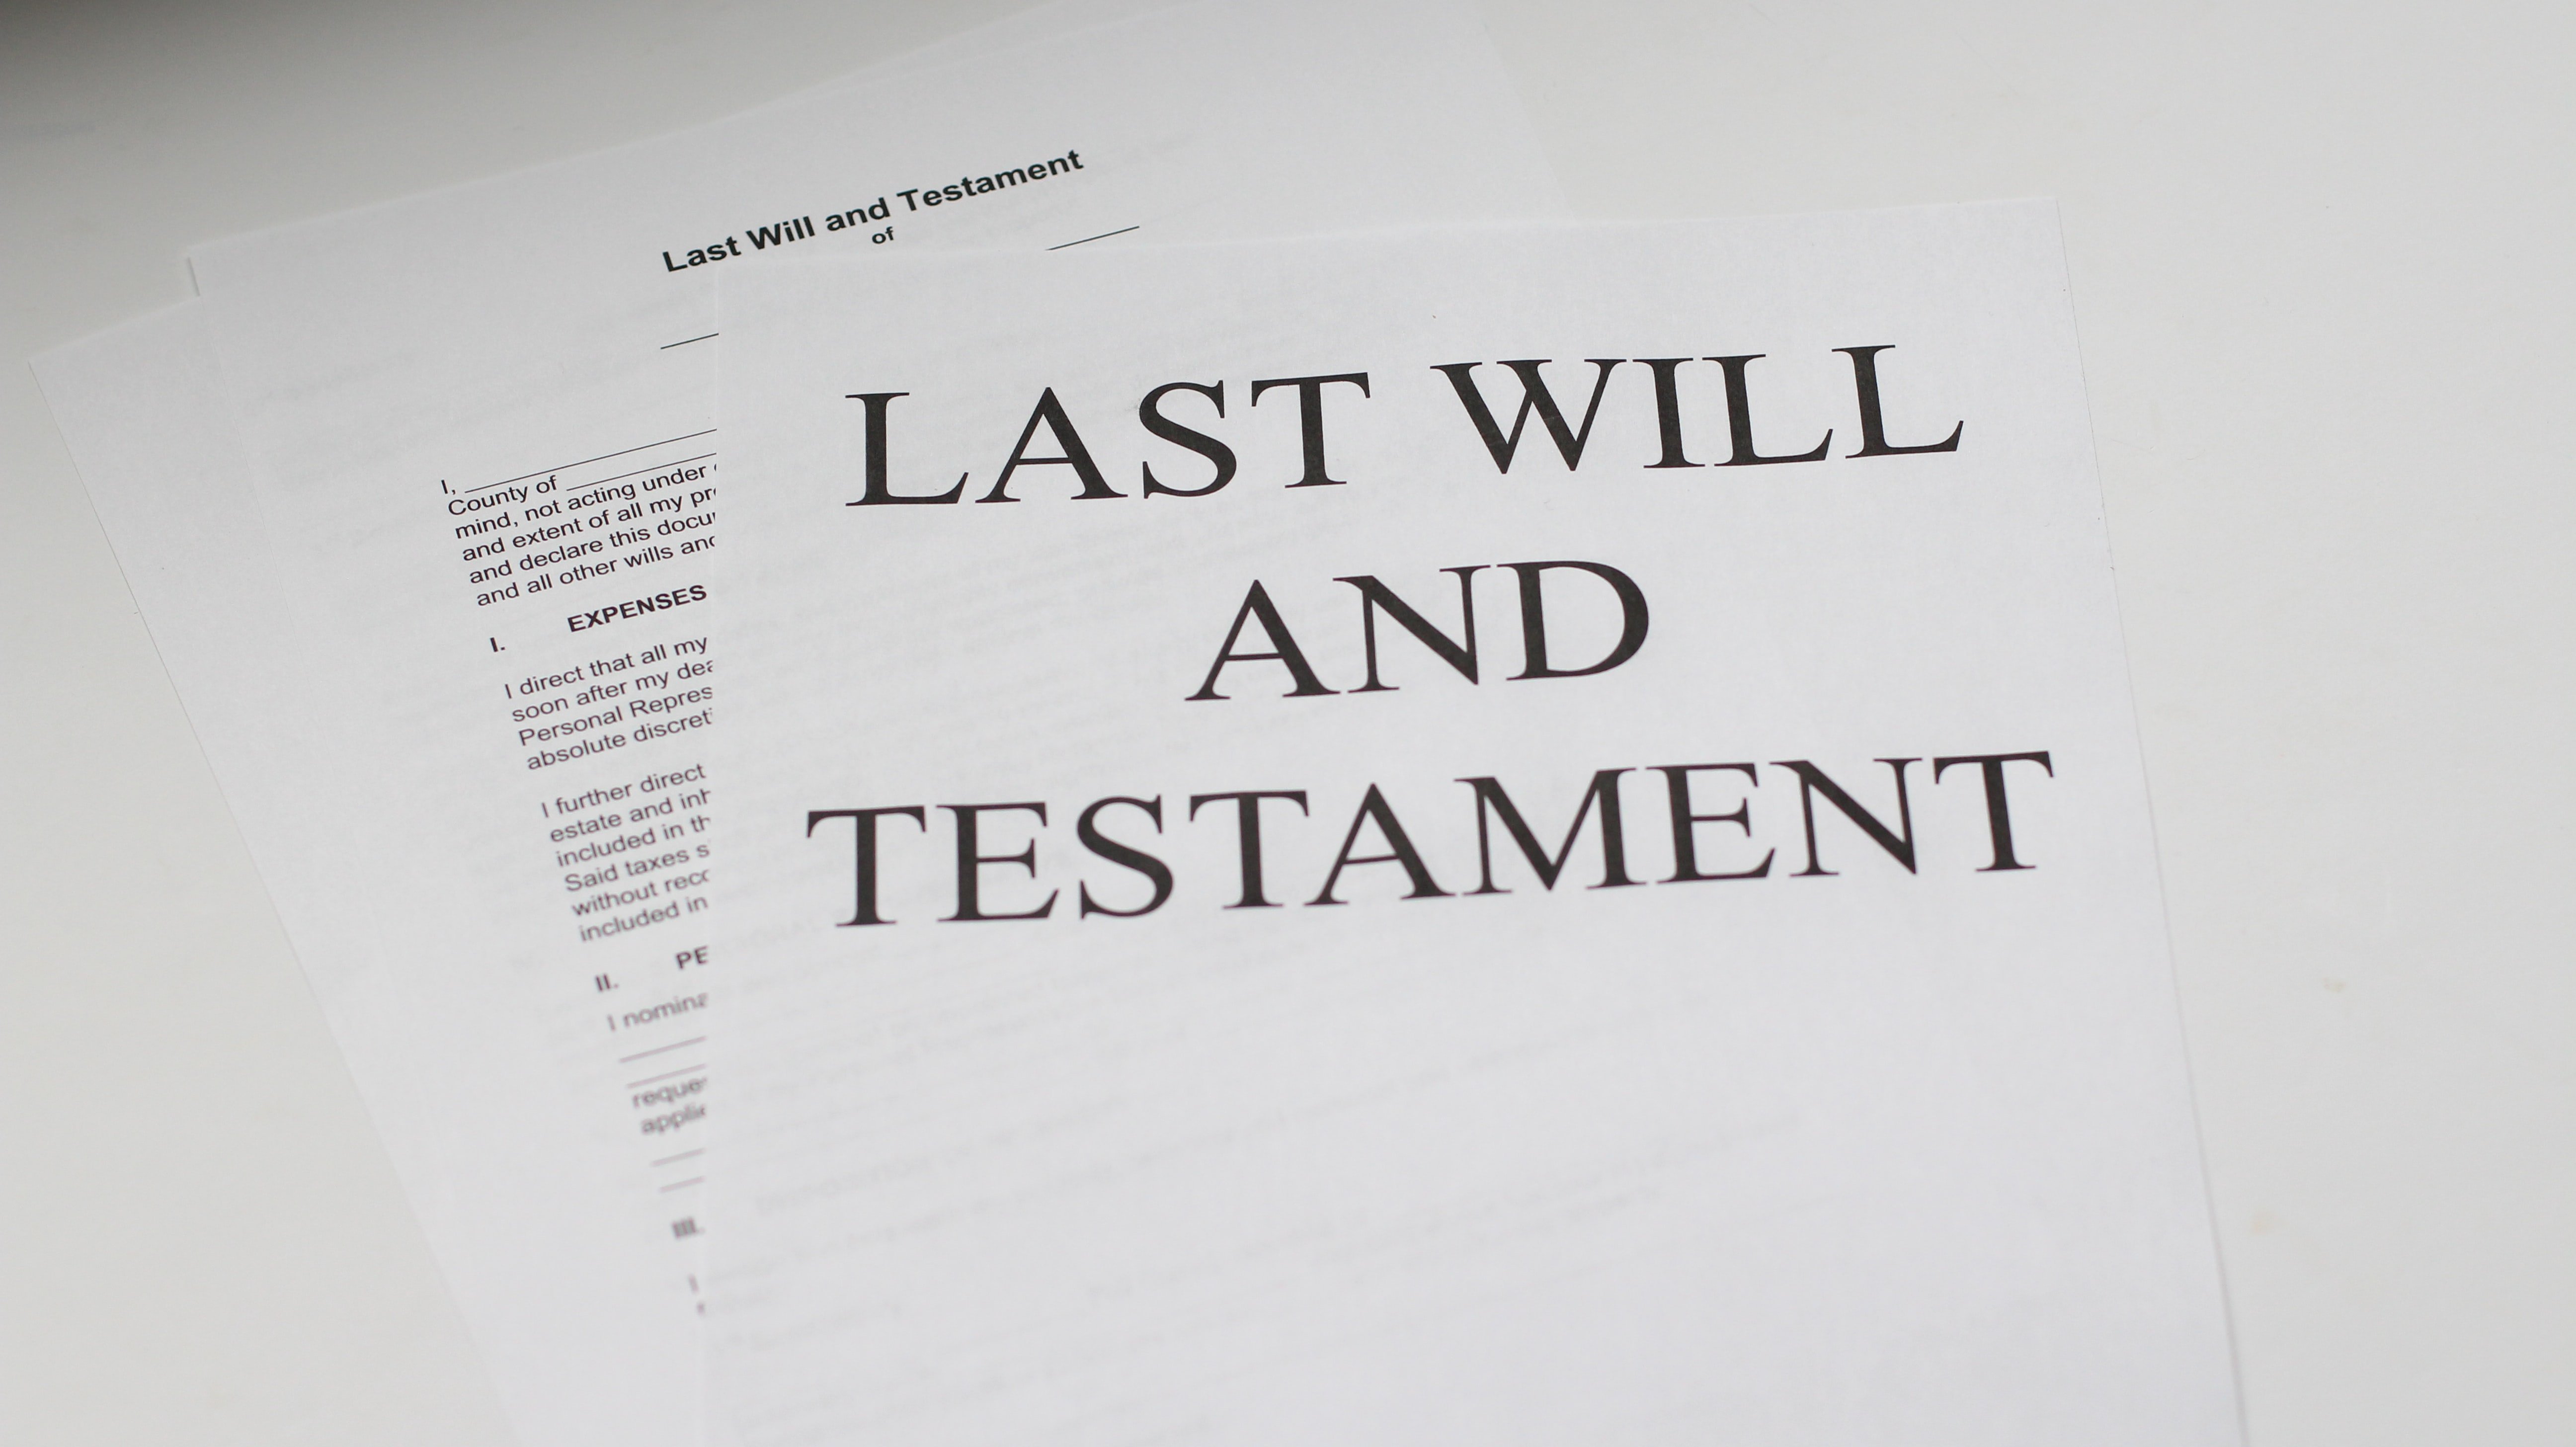 Apparently, John had left a will behind, but he'd bequeathed all his property to his secretary, Elaine | Source: Pexels